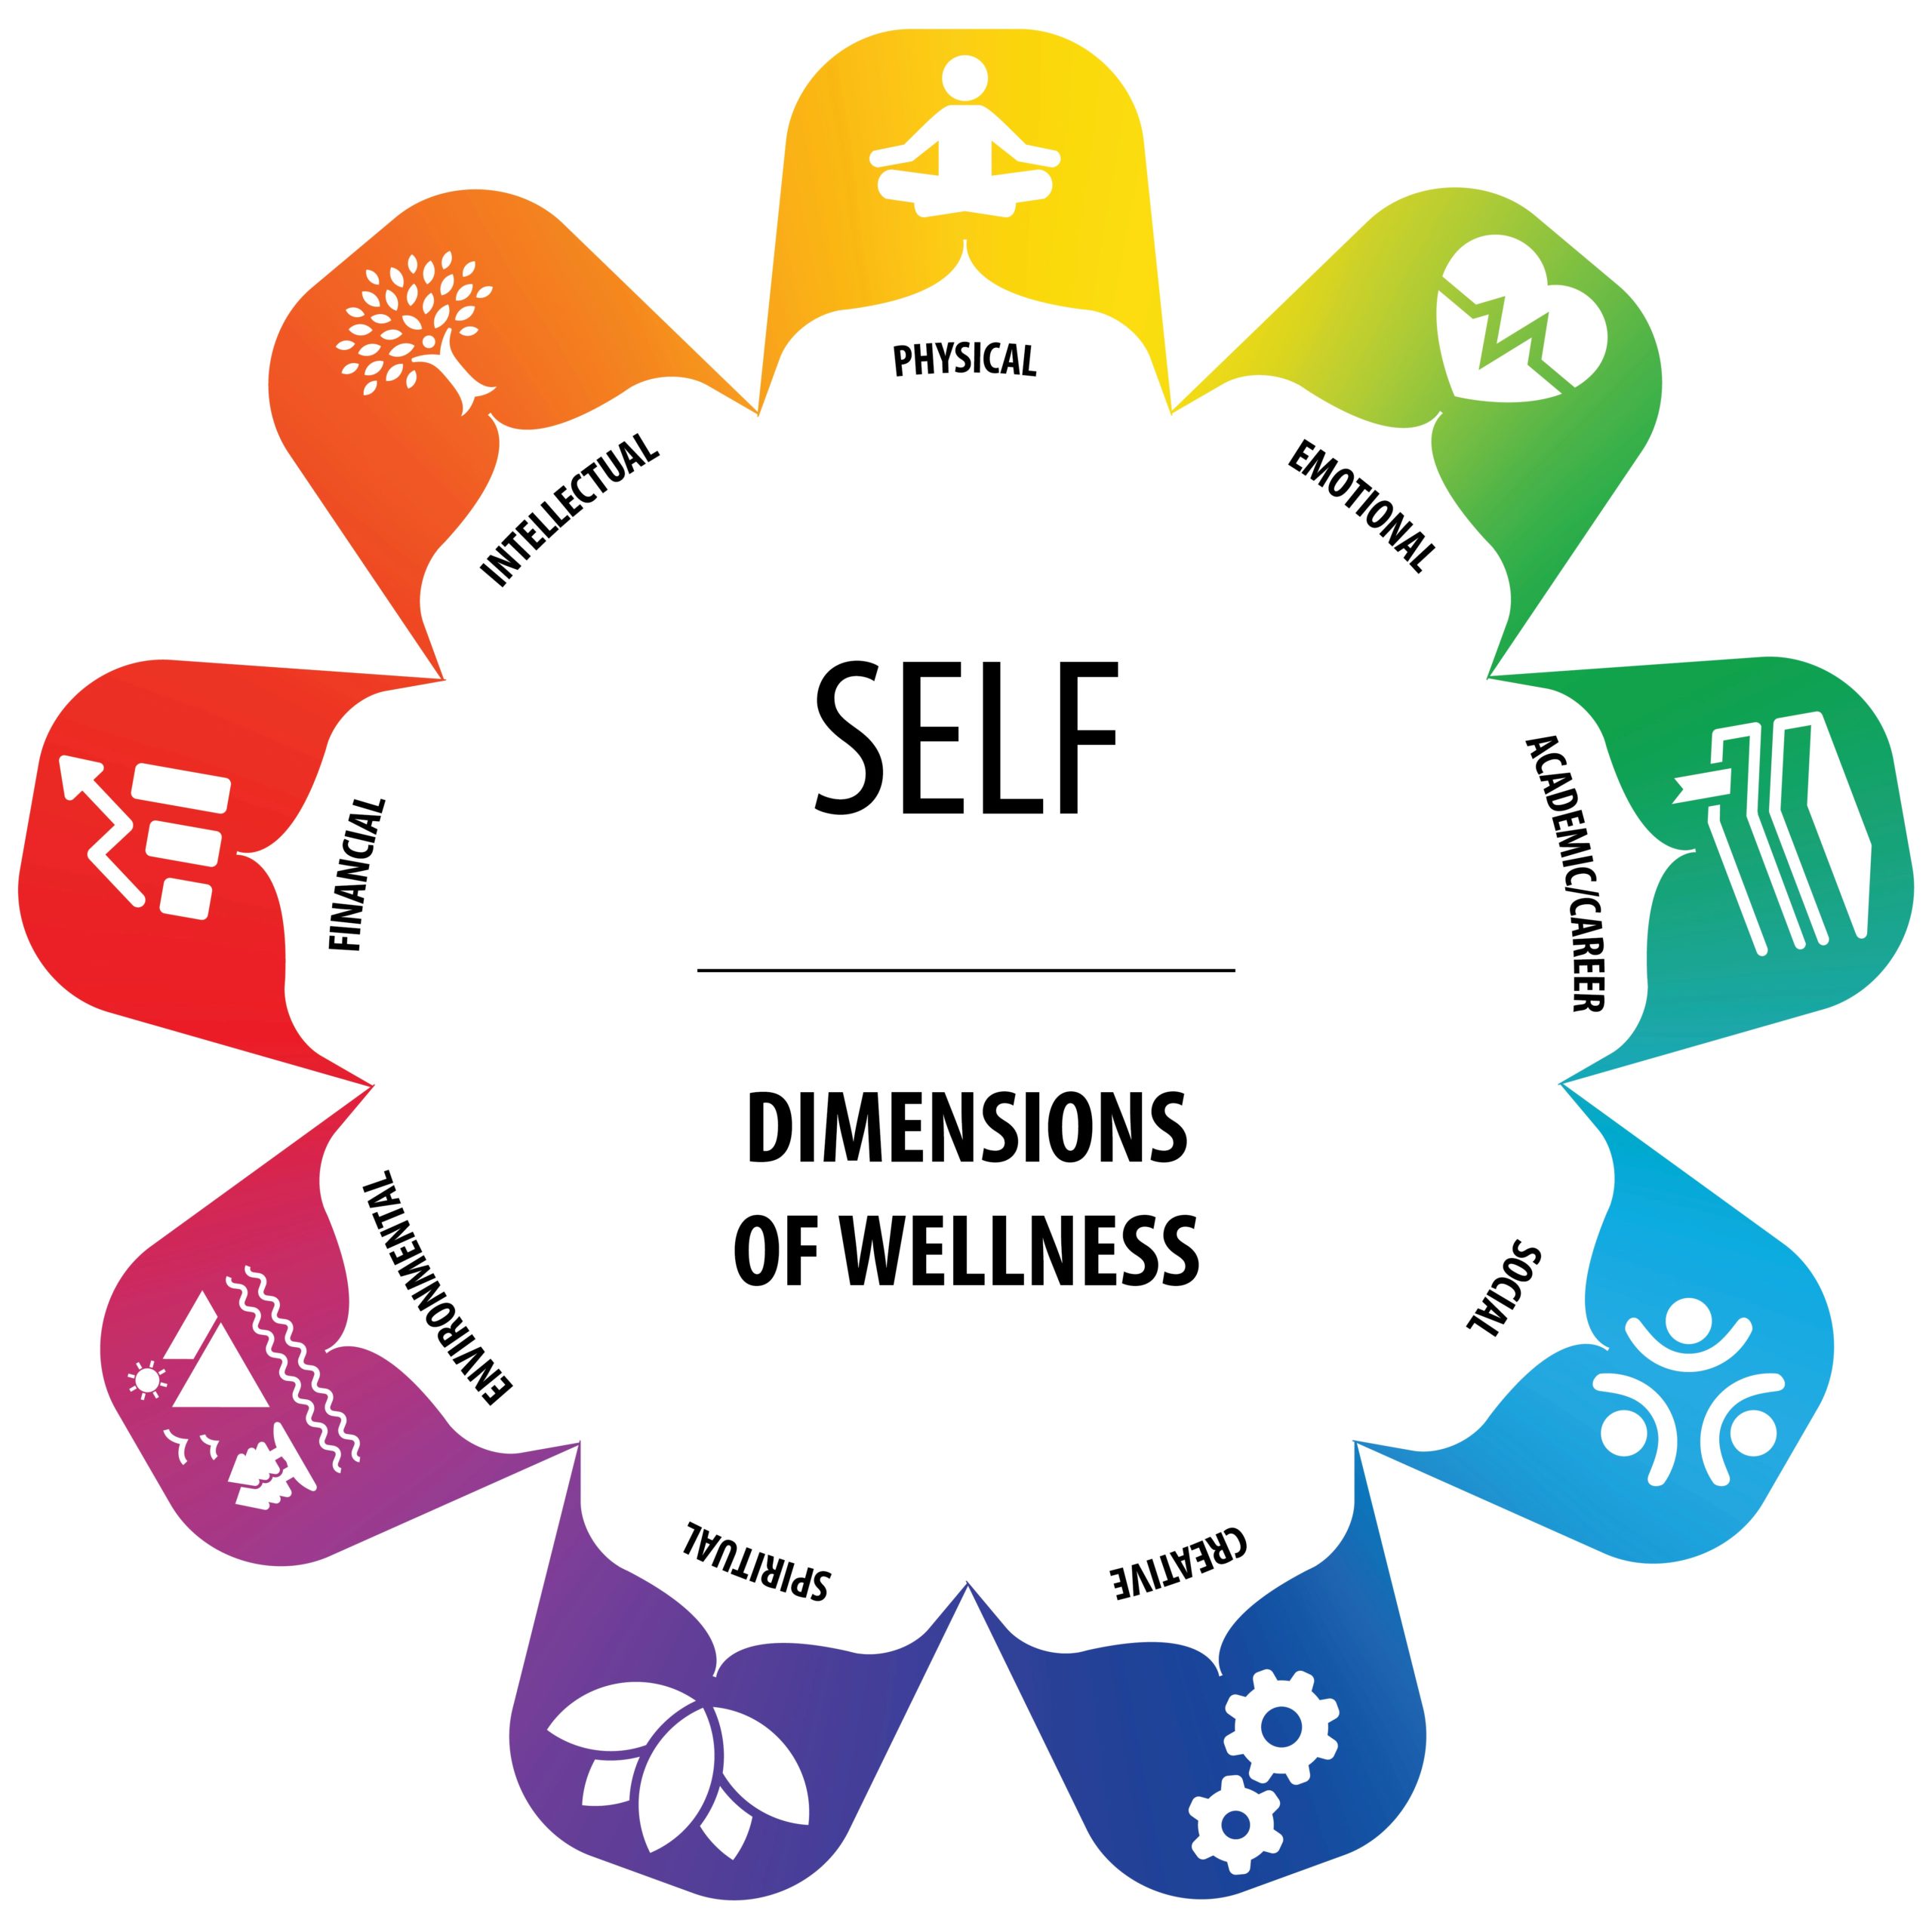 dimensions of wellness. image described by the following text